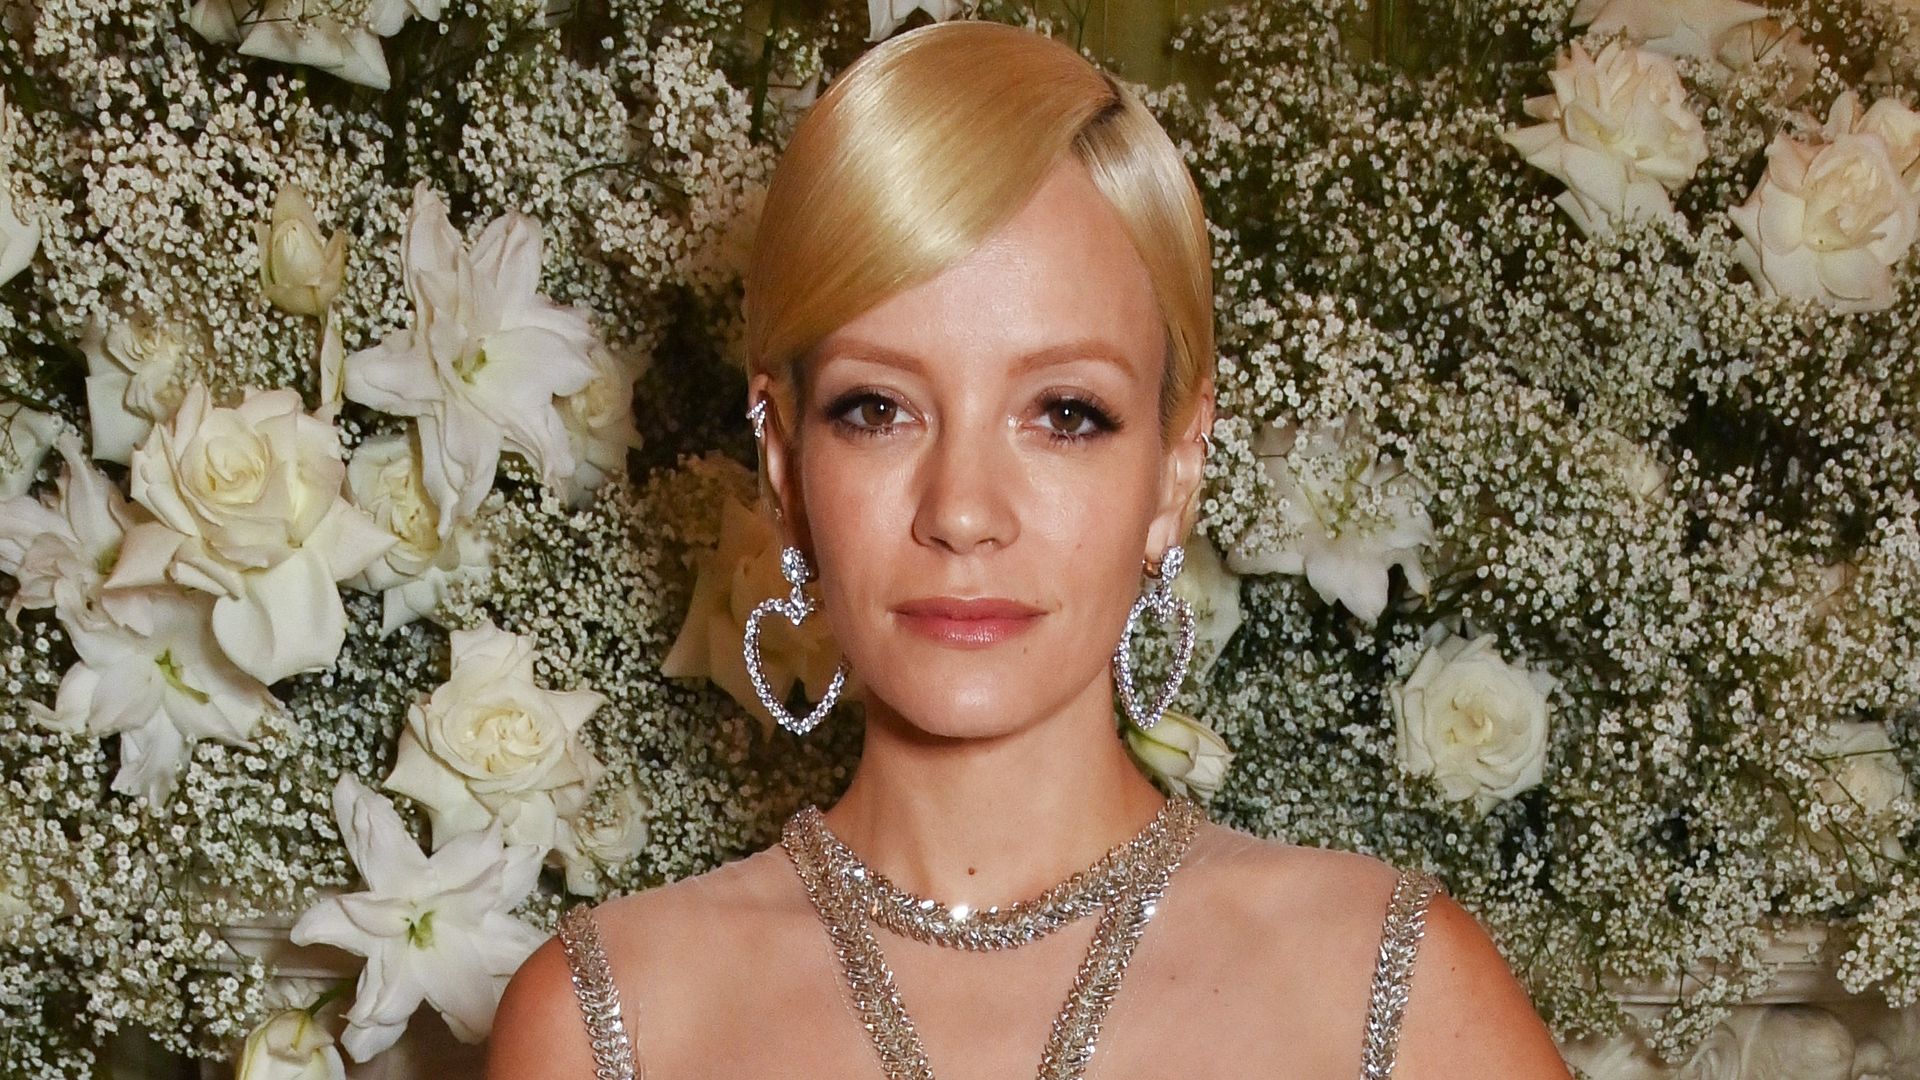 Lily Allen wearing a white ruffle gown 